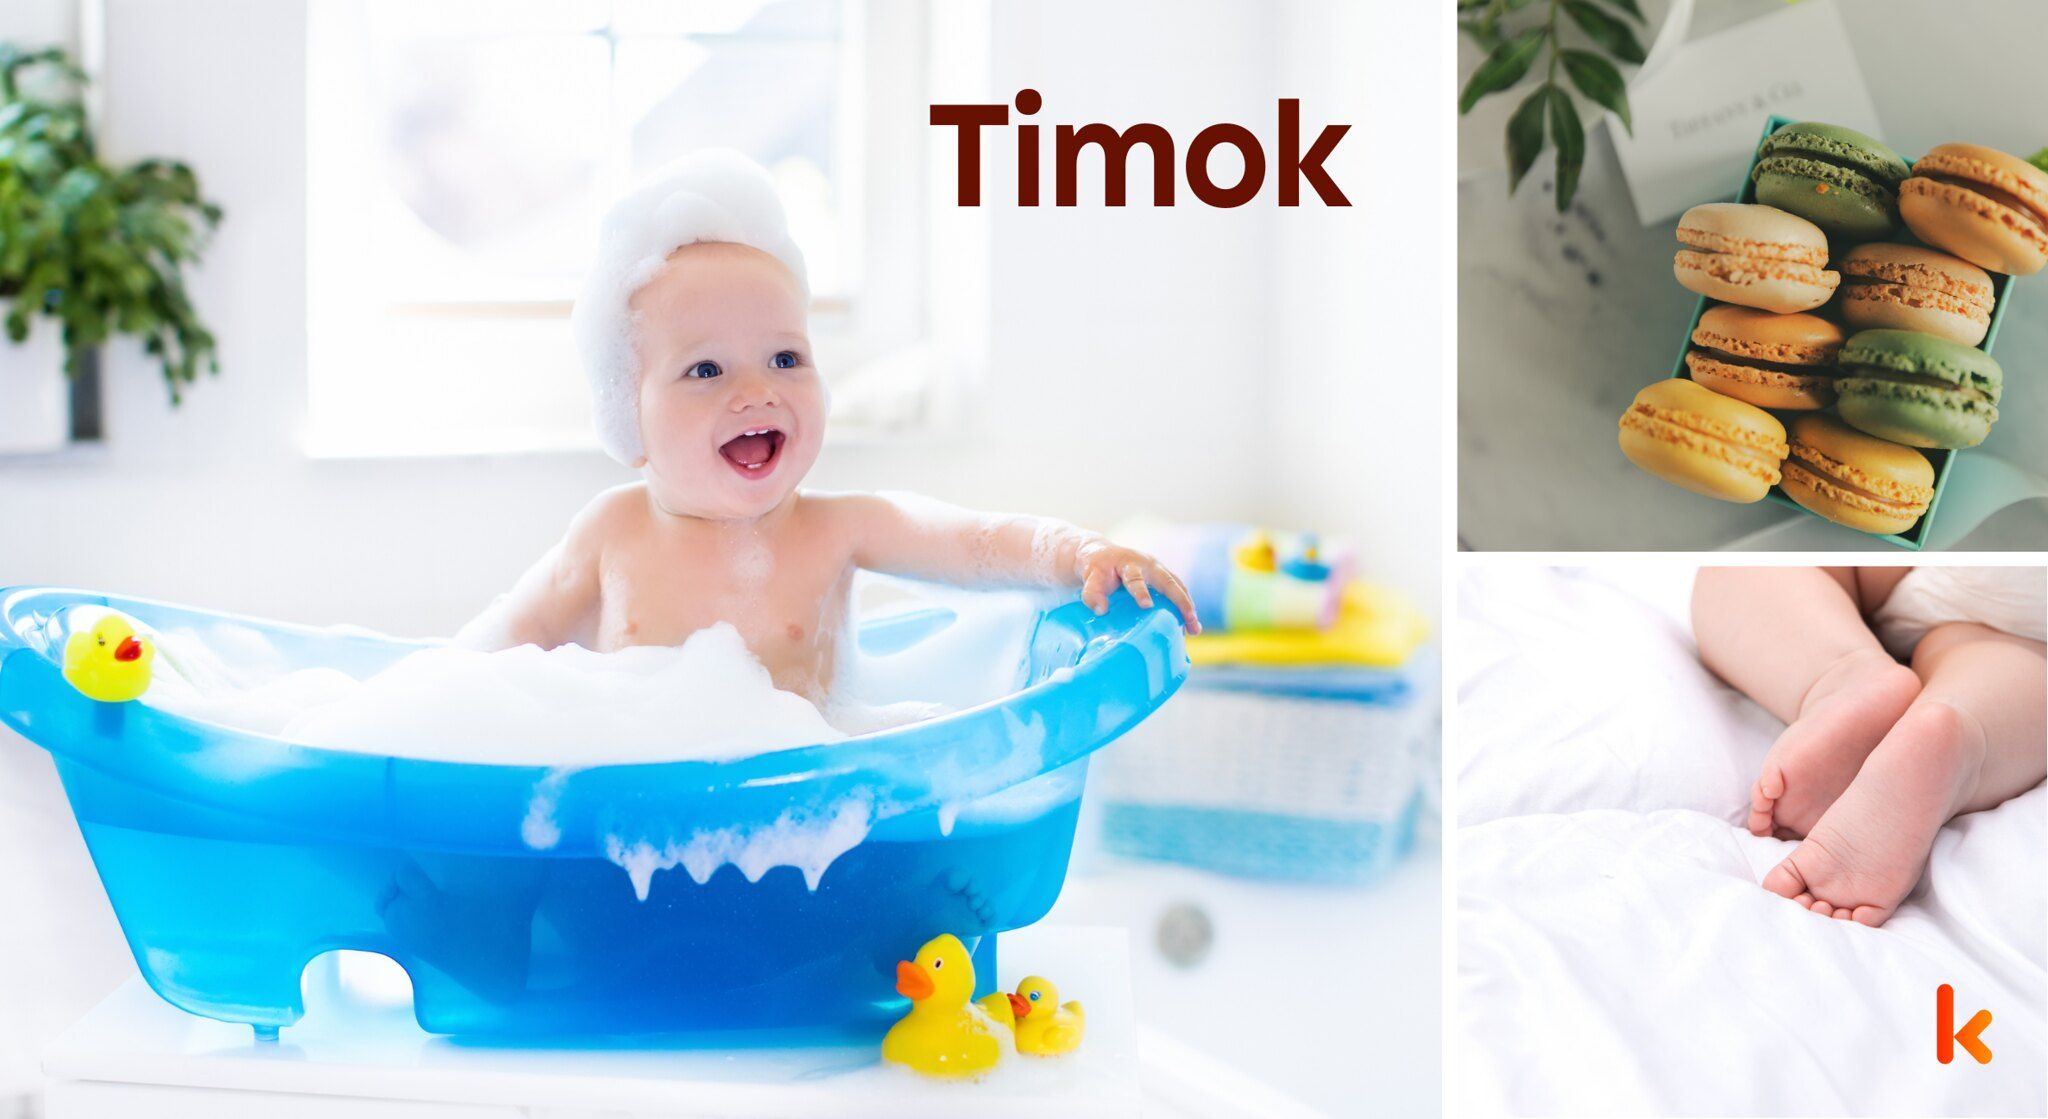 Meaning of the name Timok